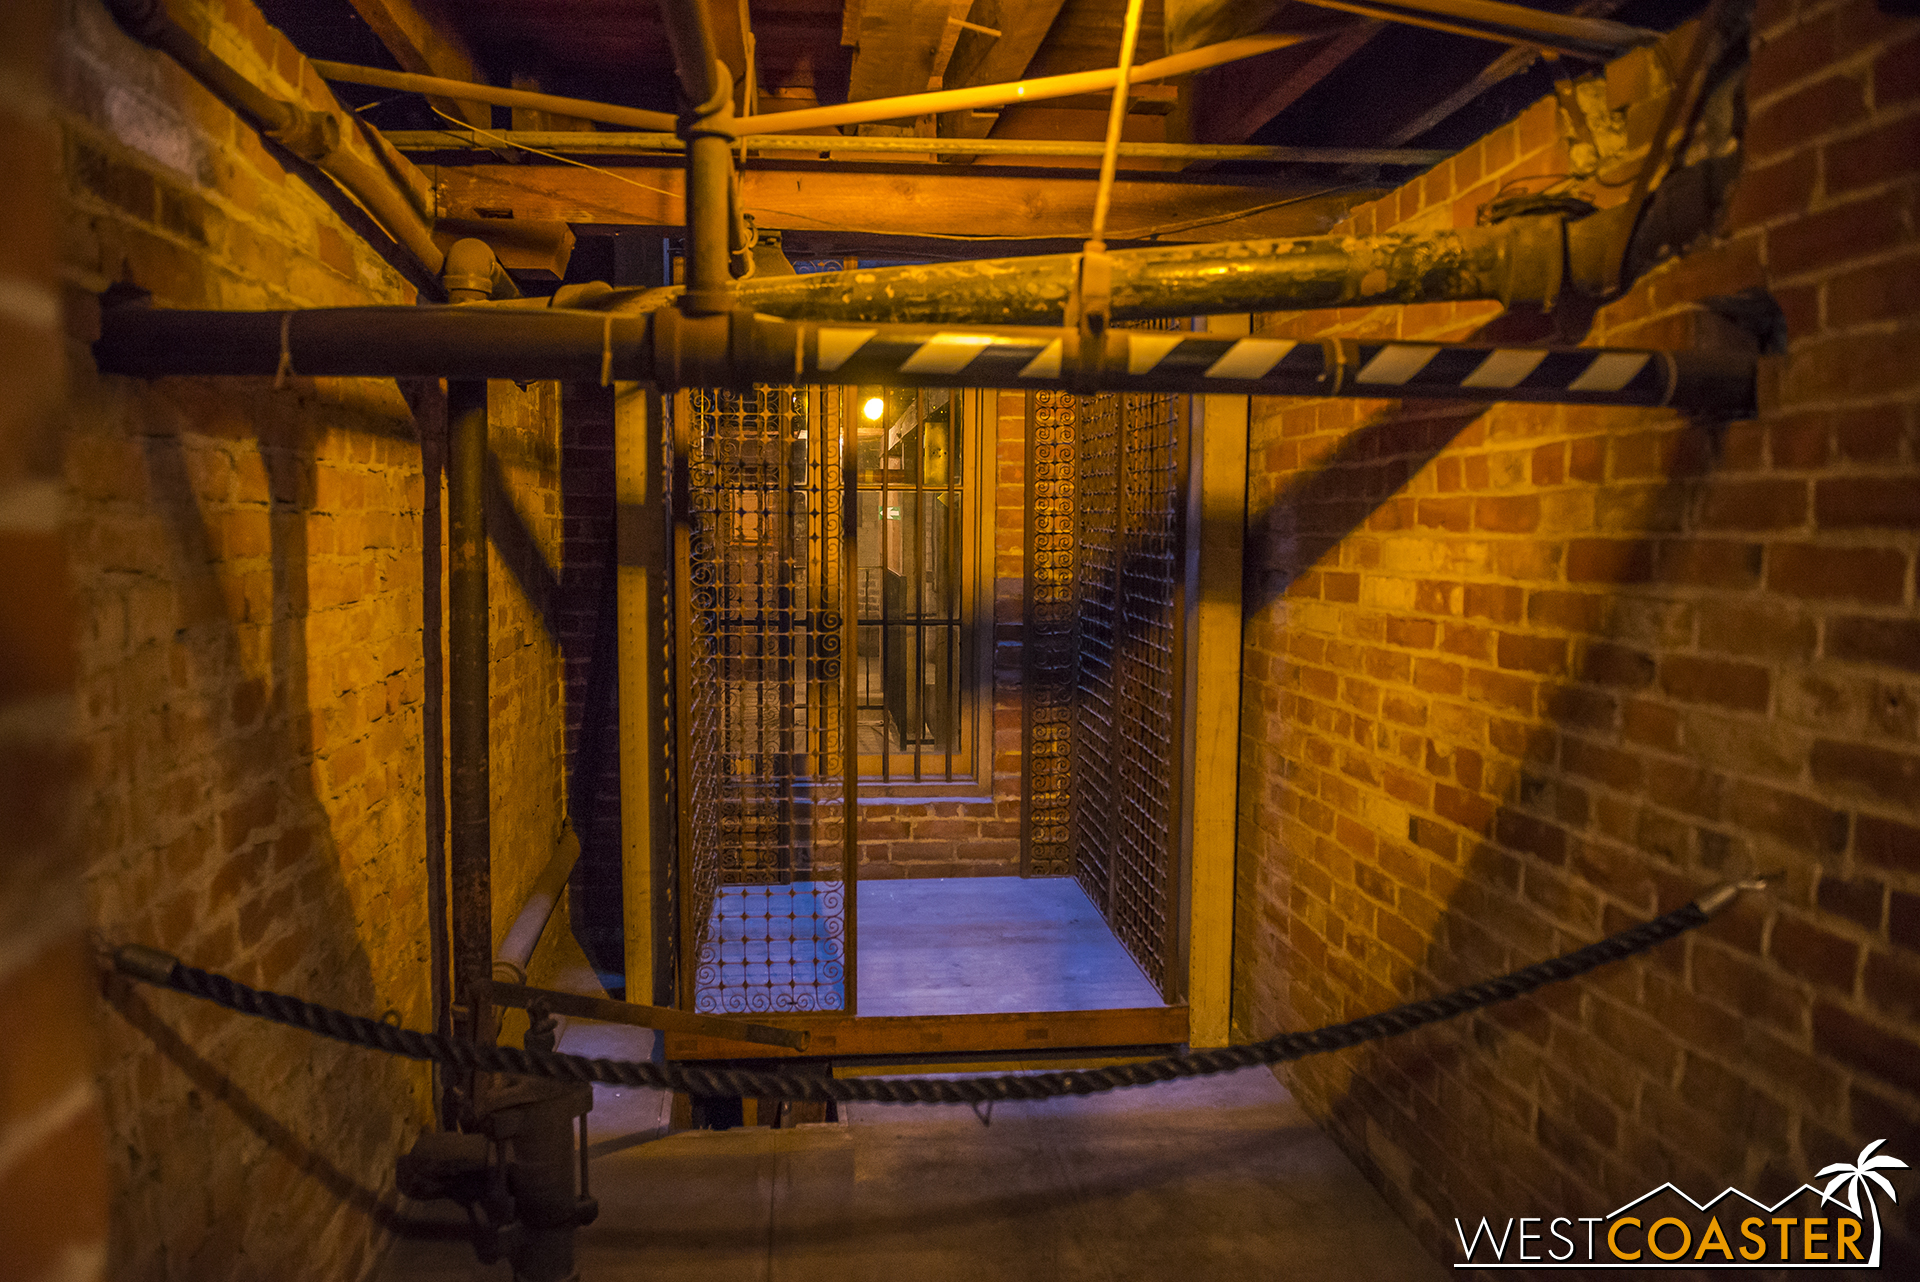  A trip through the basement passes by one of the house's elevators--now no longer in use. 